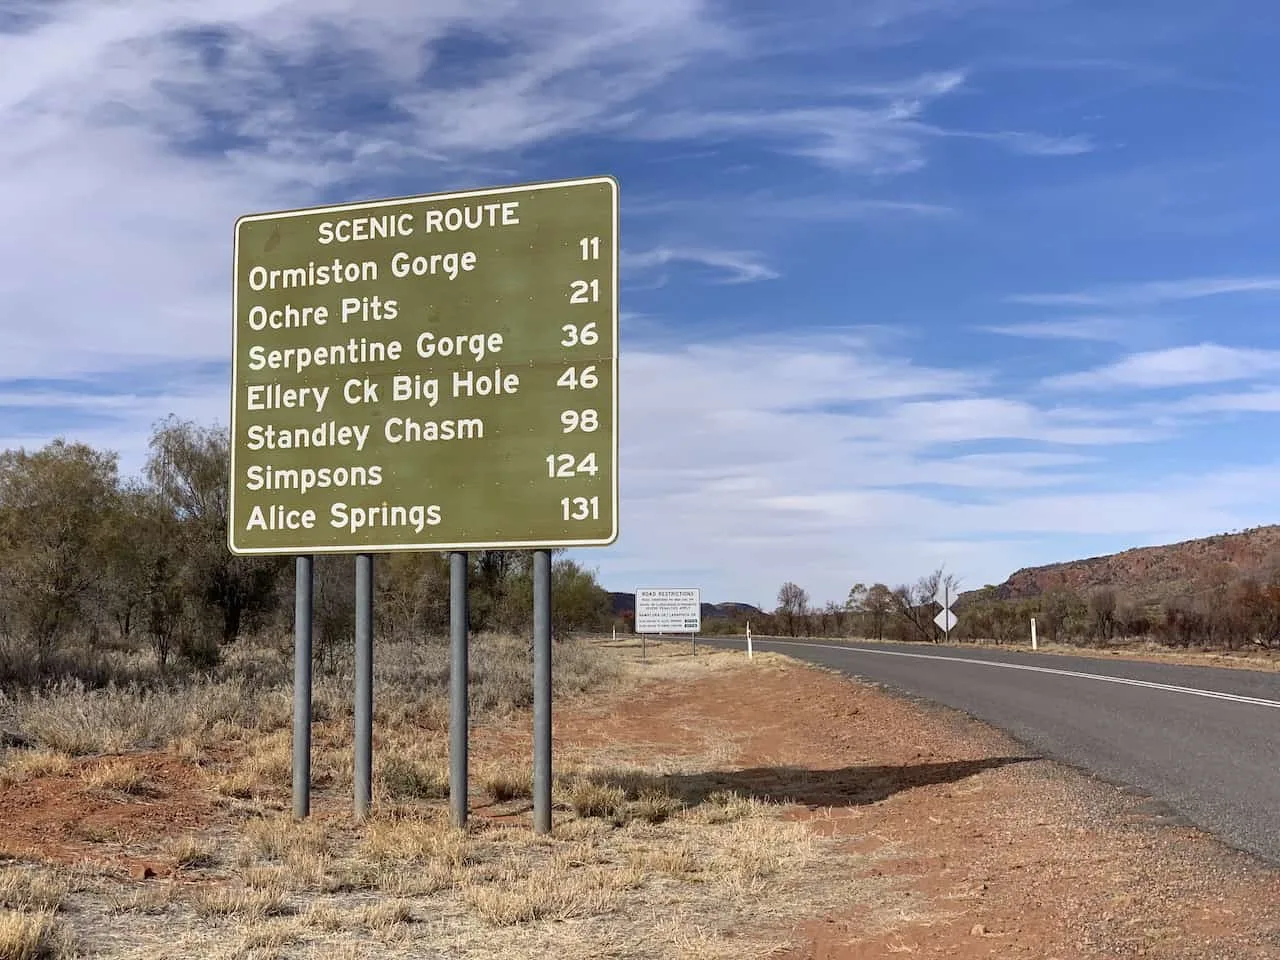 West MacDonnell Ranges Scenic Route